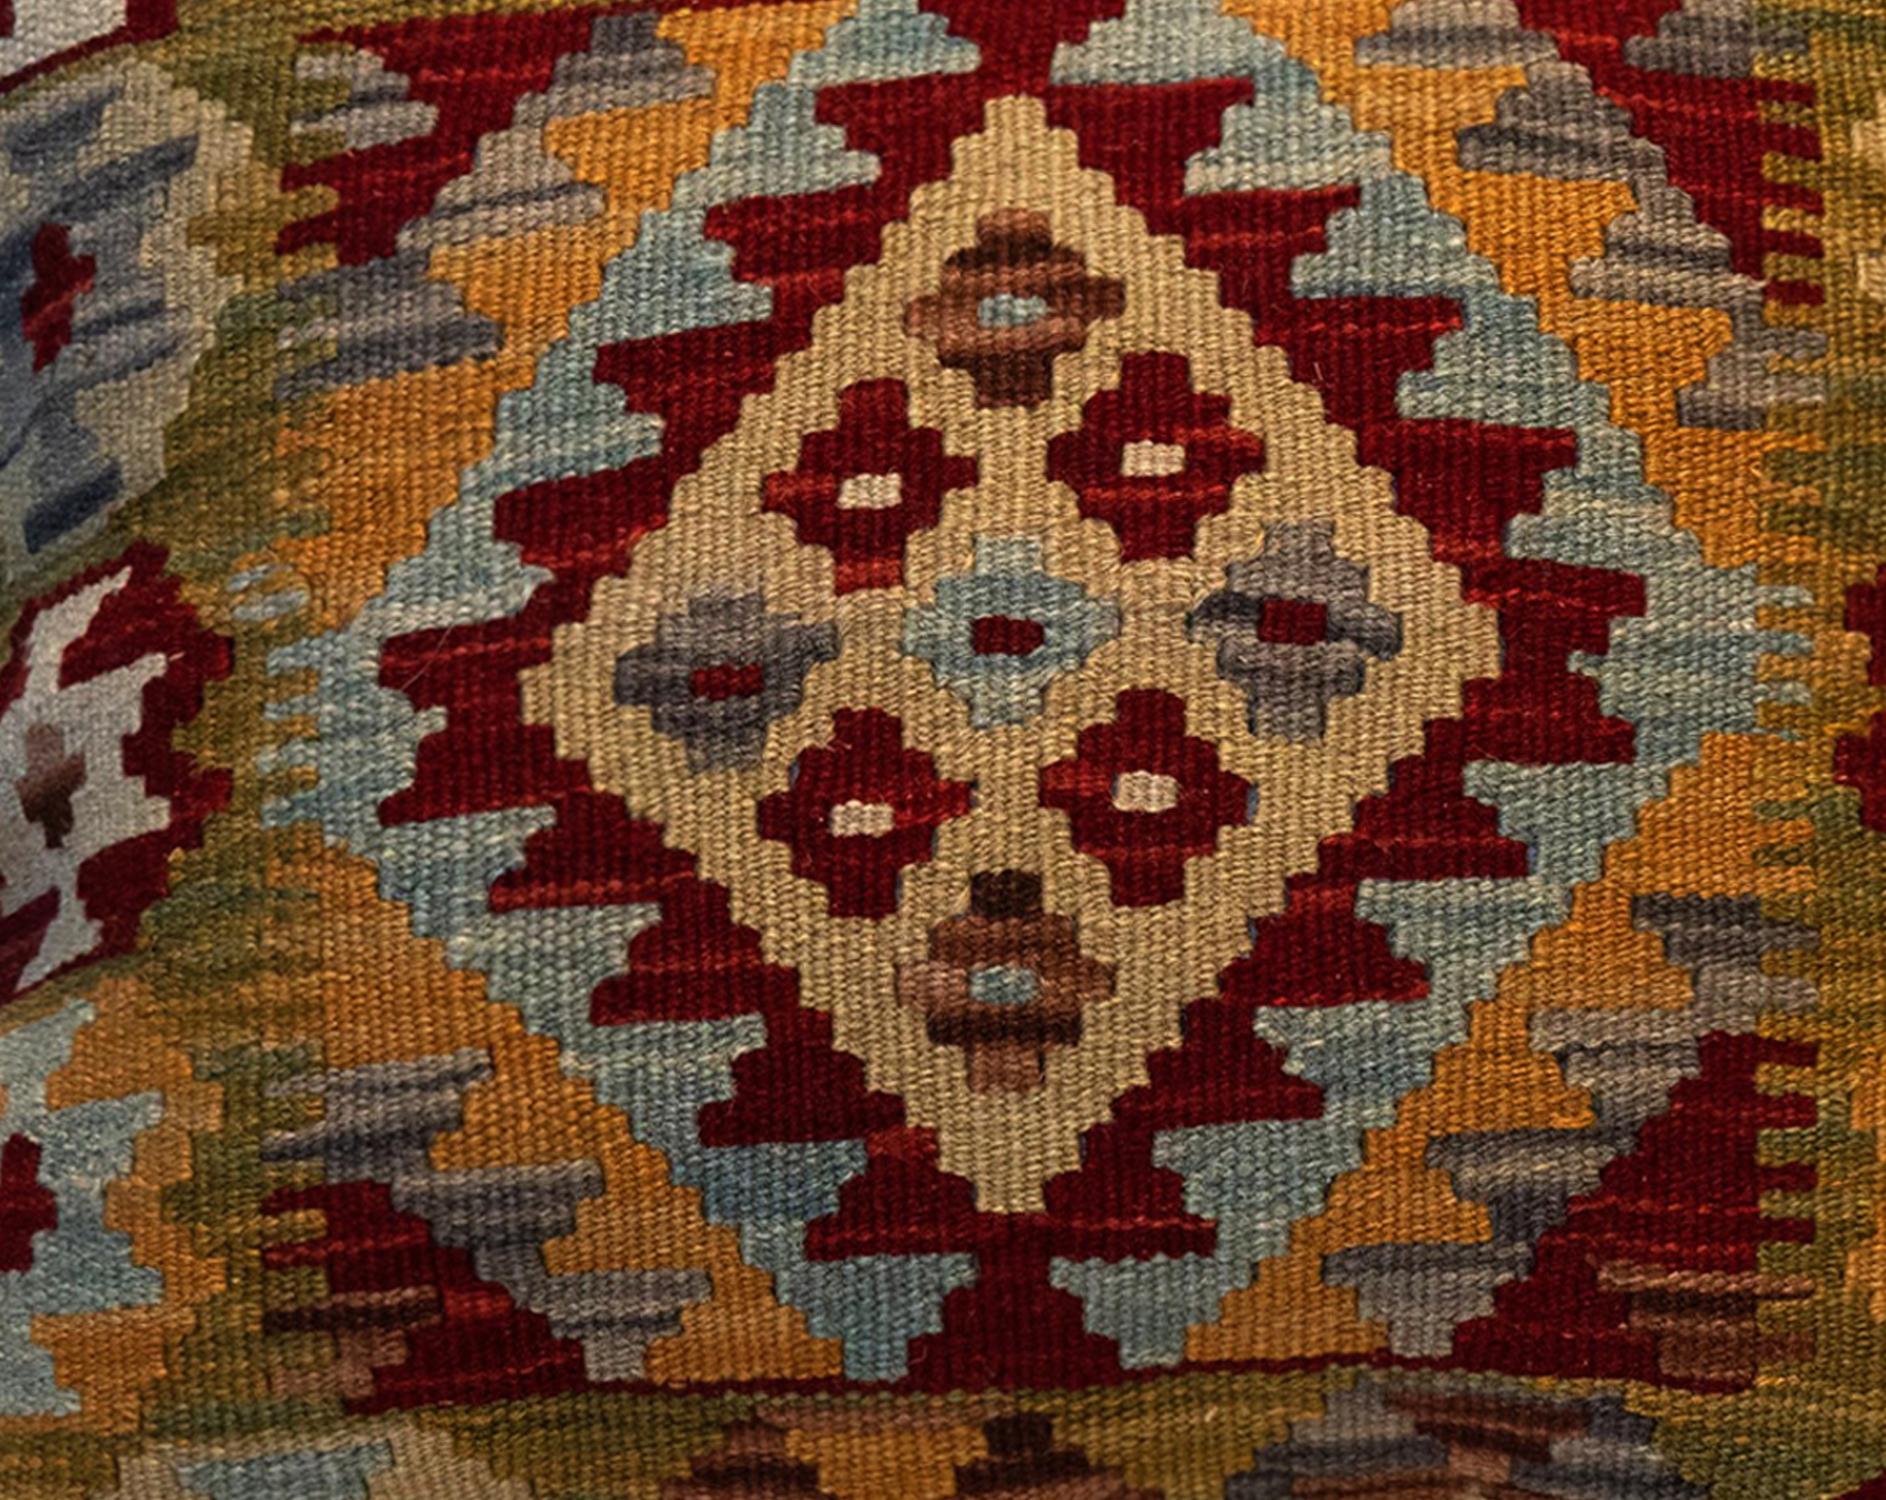 Hollywood Regency Afghan Kilim Cushion Cover Handwoven Wool Scatter Pillow Case